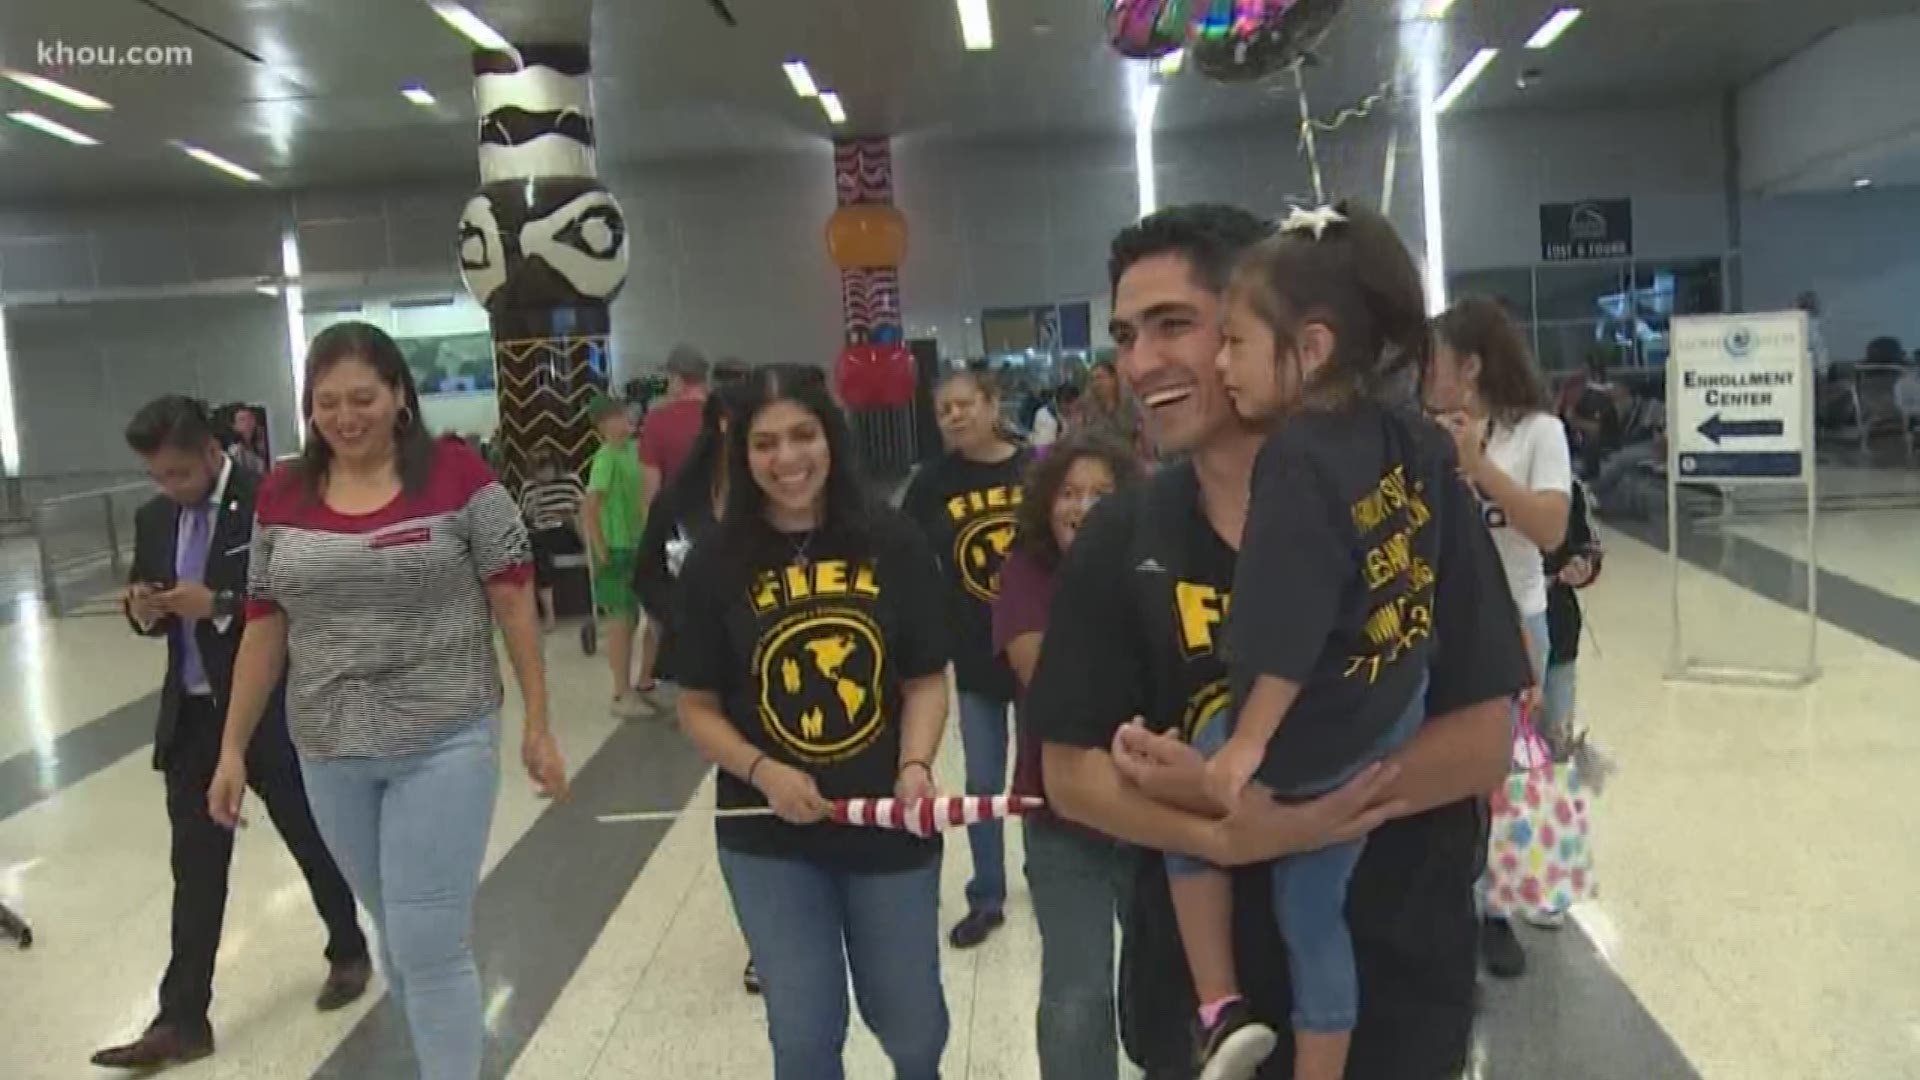 A Houston father deported and separated from his family for more than 2 years came home to cheers at Bush Airport Monday evening.